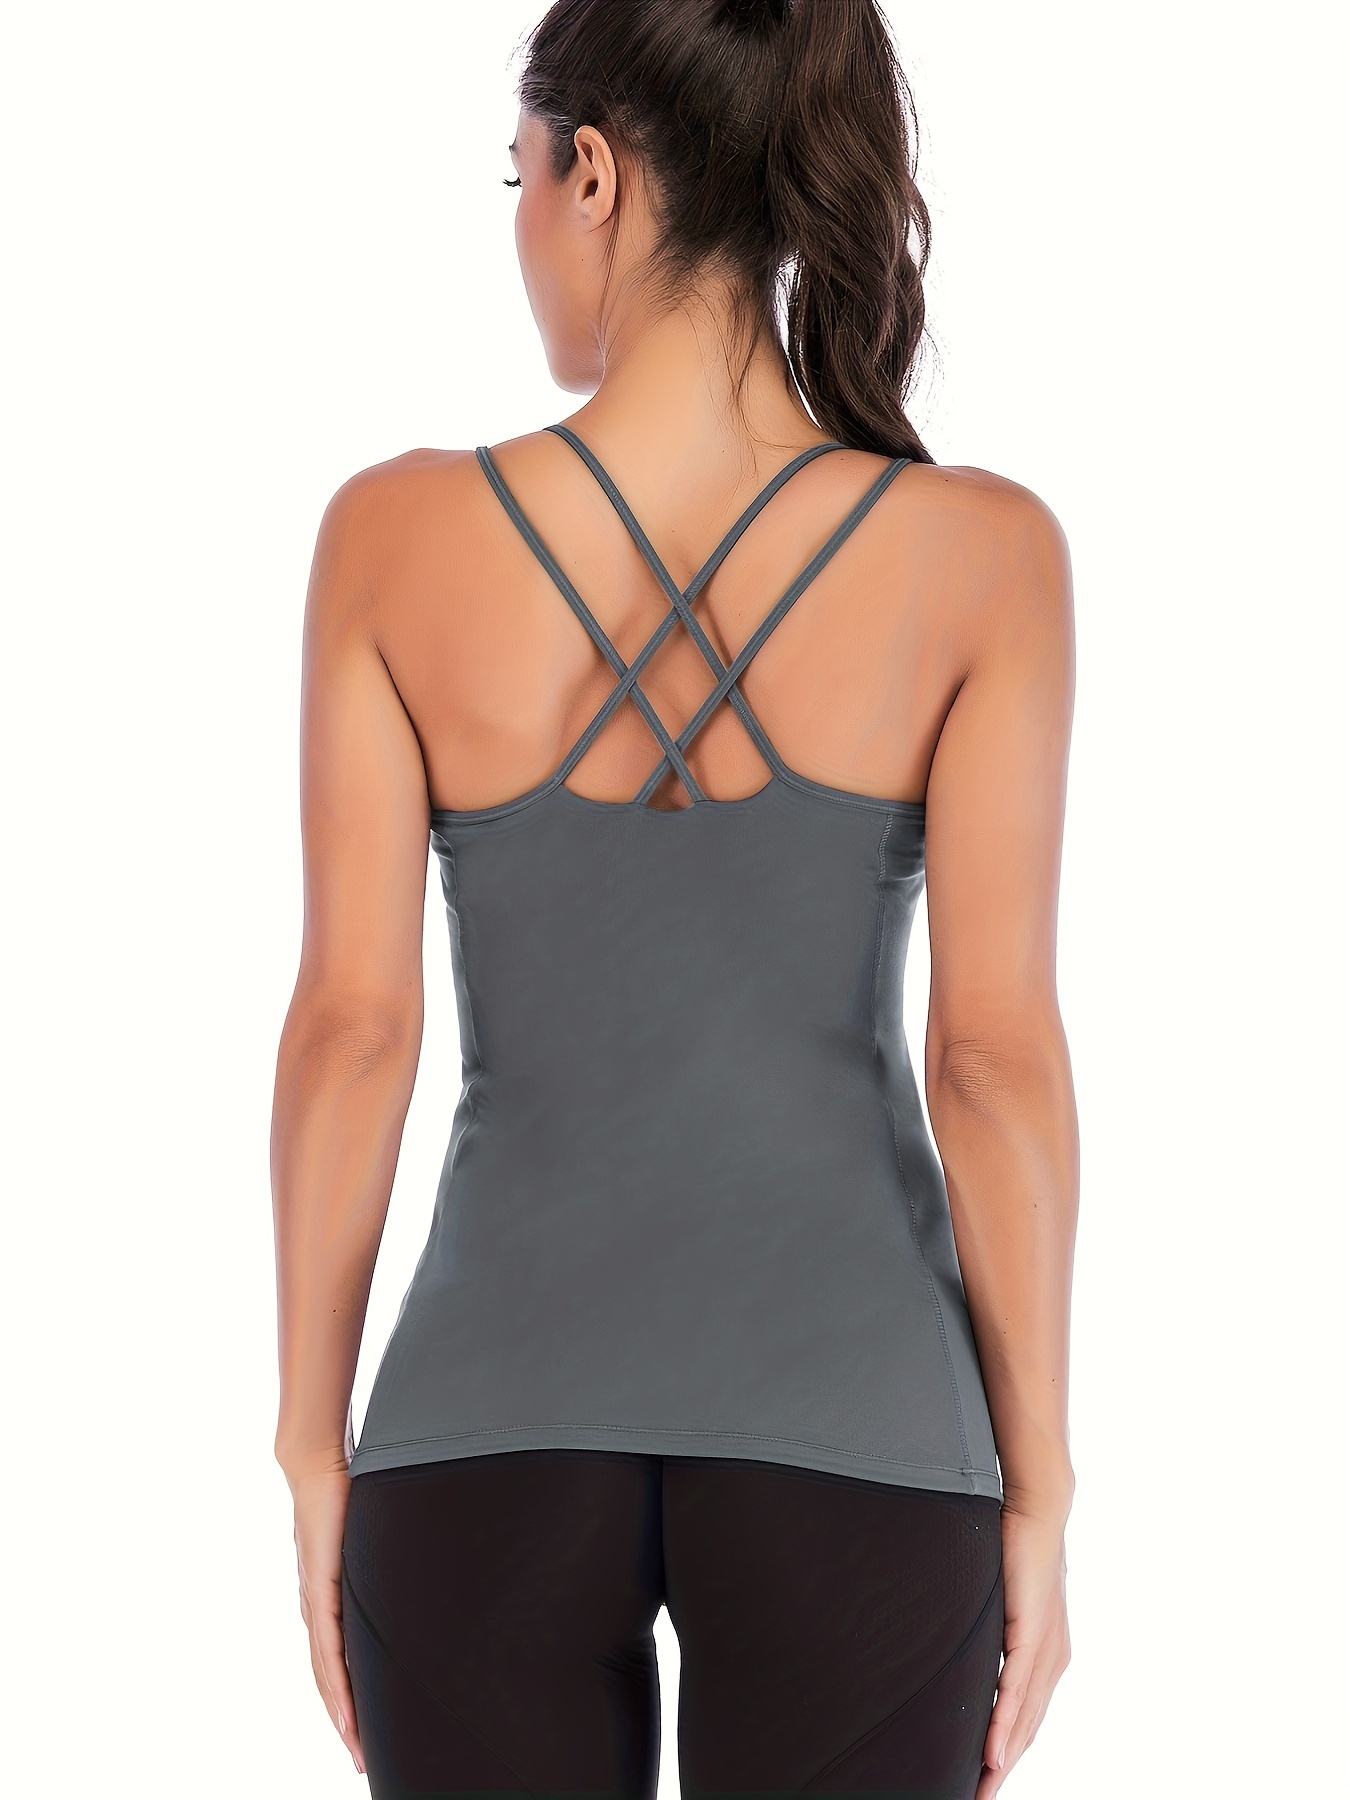 Youloveit Workout Tank Tops for Women with Built in Sports Bra Strappy  Camisole Yoga Longline Sports Bras Athletic Tops at  Women's Clothing  store